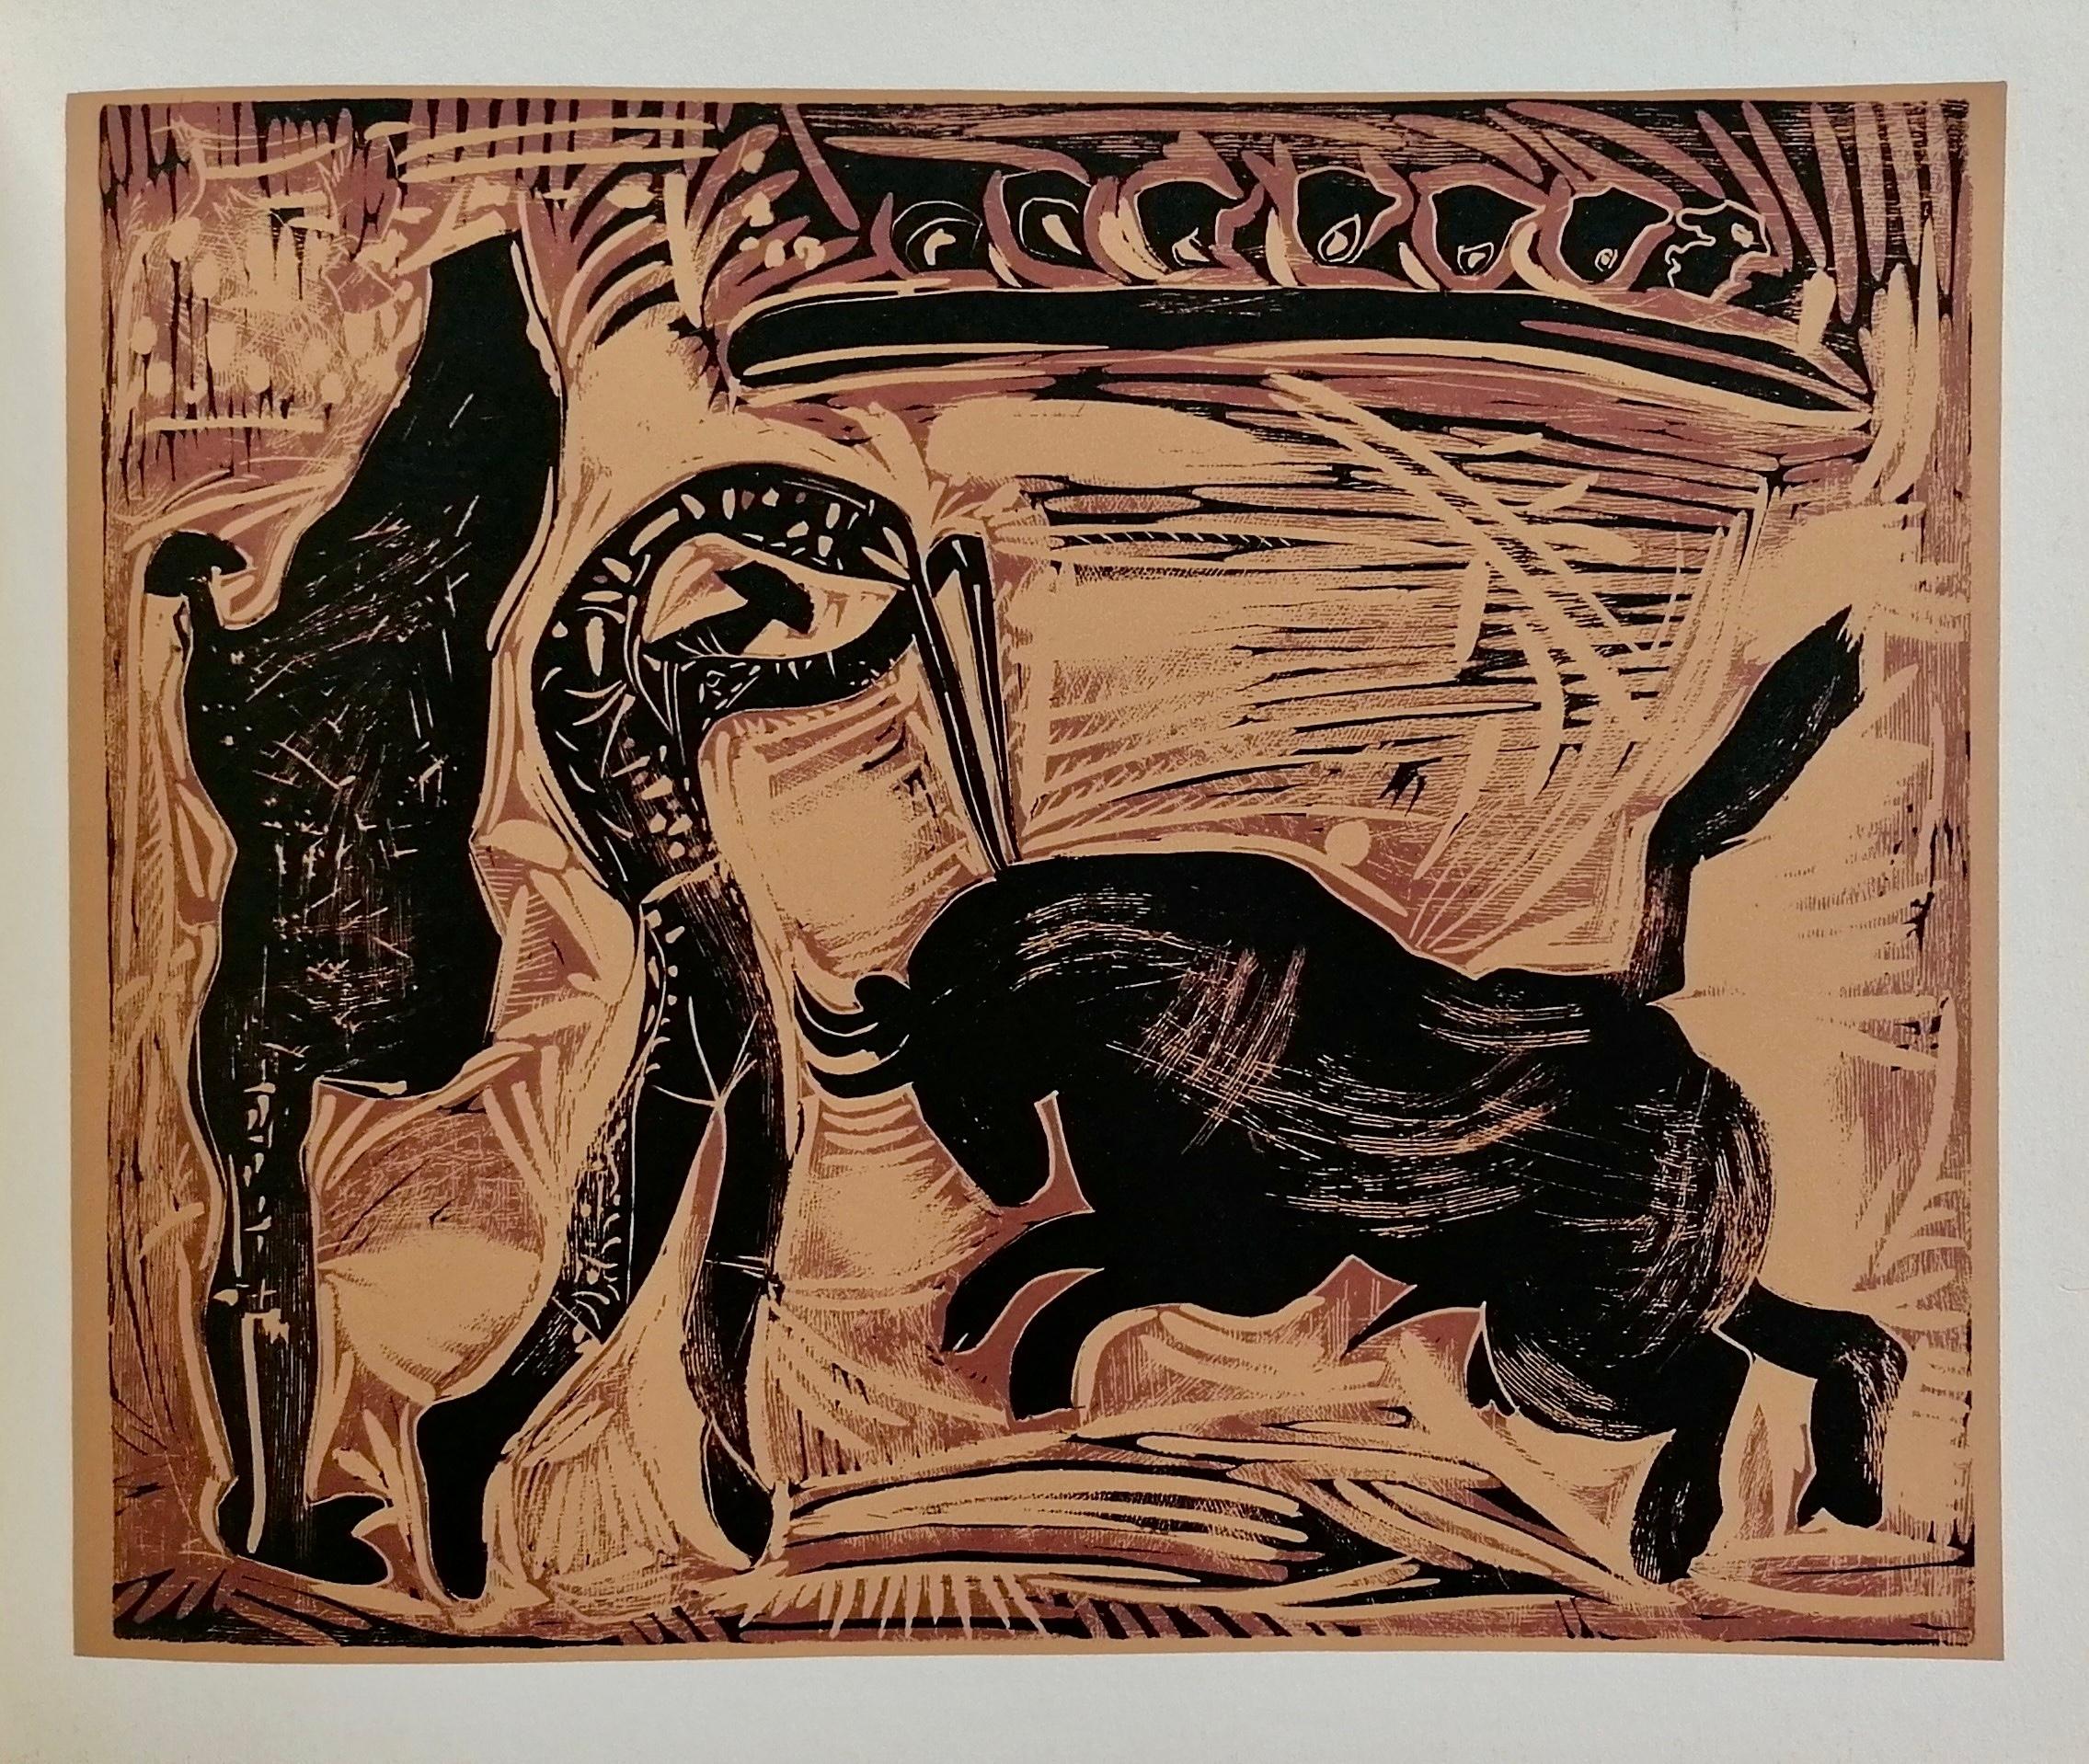 Picasso, The Banderillero, Pablo Picasso-Linogravures (after) For Sale 3